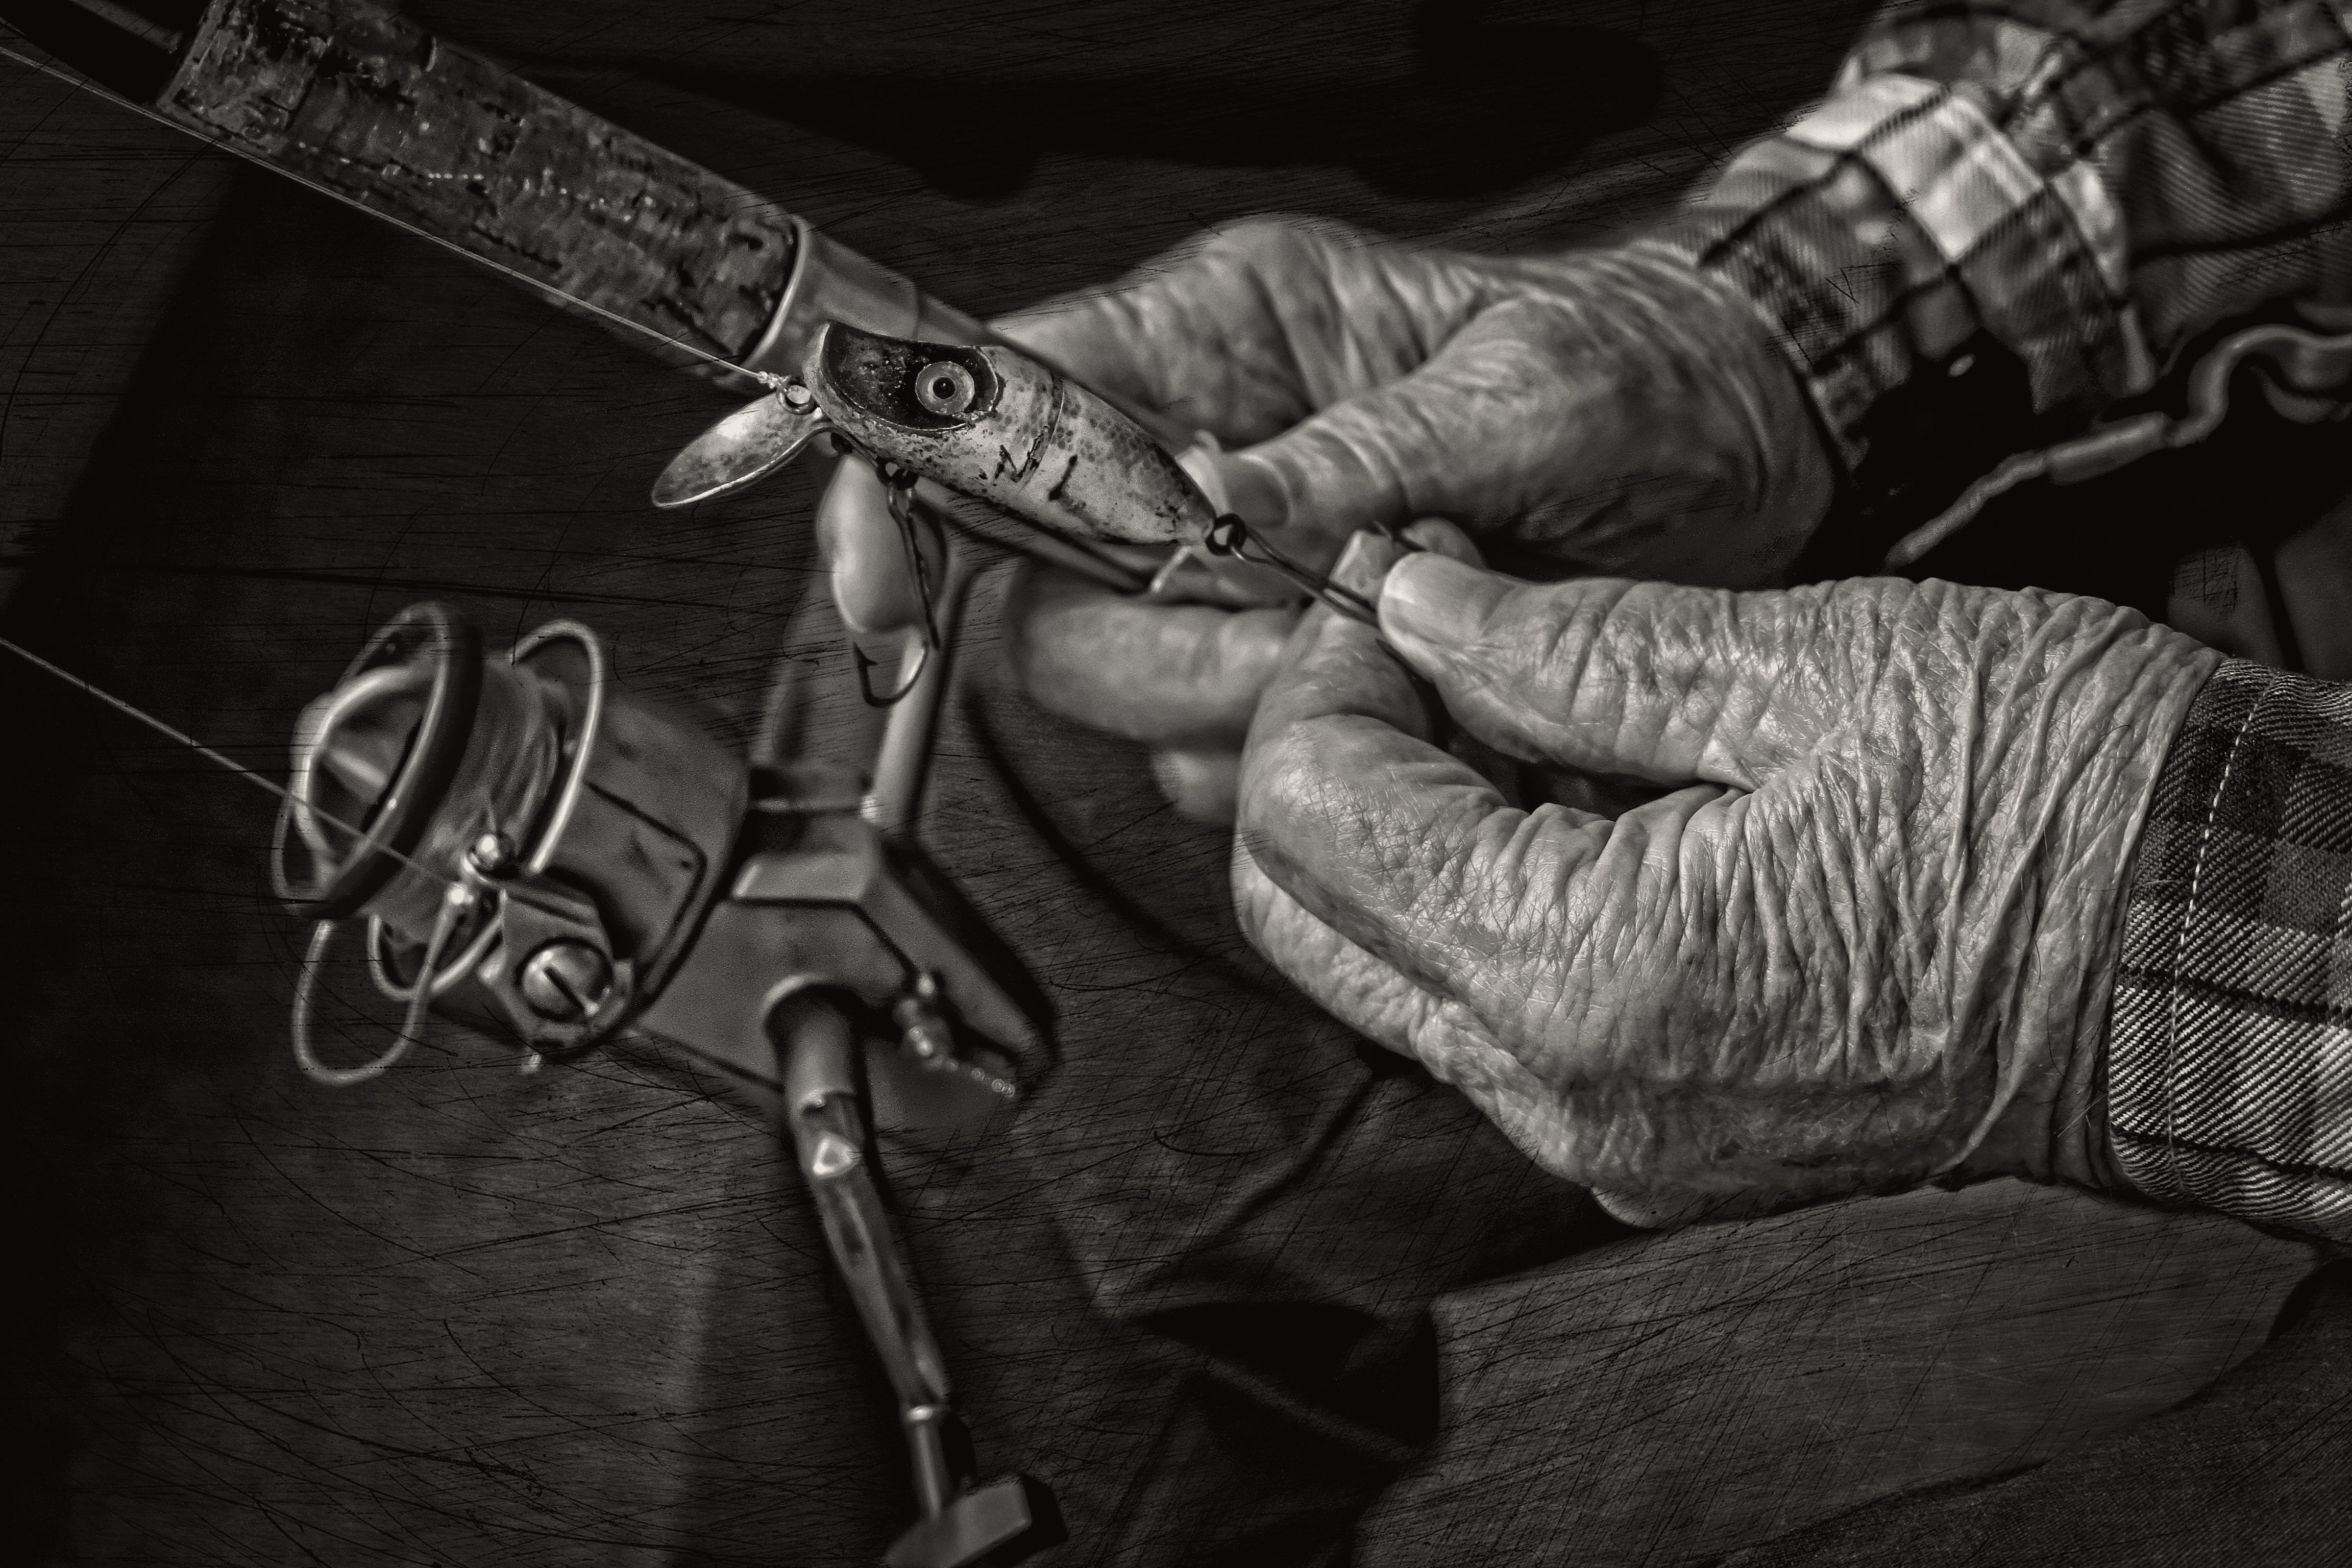 Elderly hands holding a fishing rod